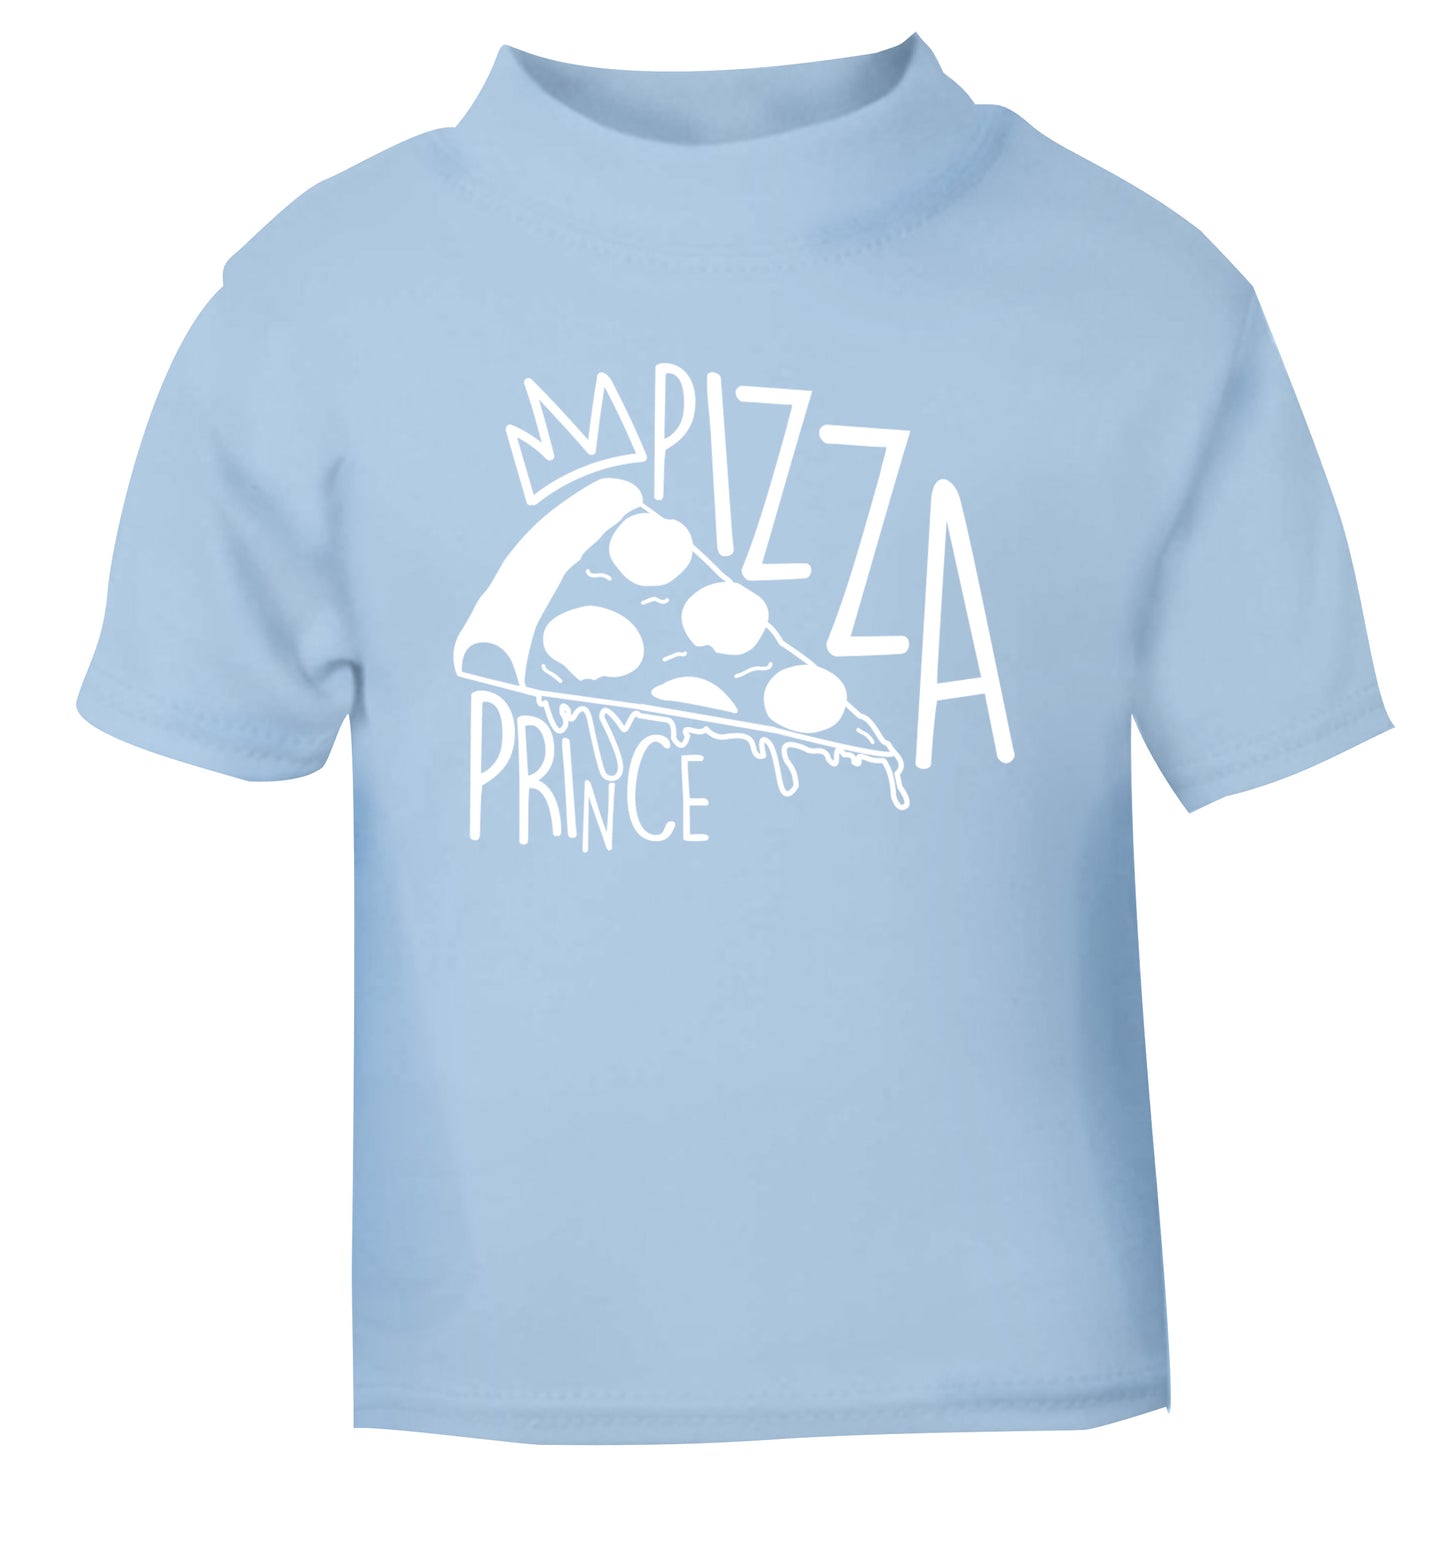 Pizza Prince light blue Baby Toddler Tshirt 2 Years